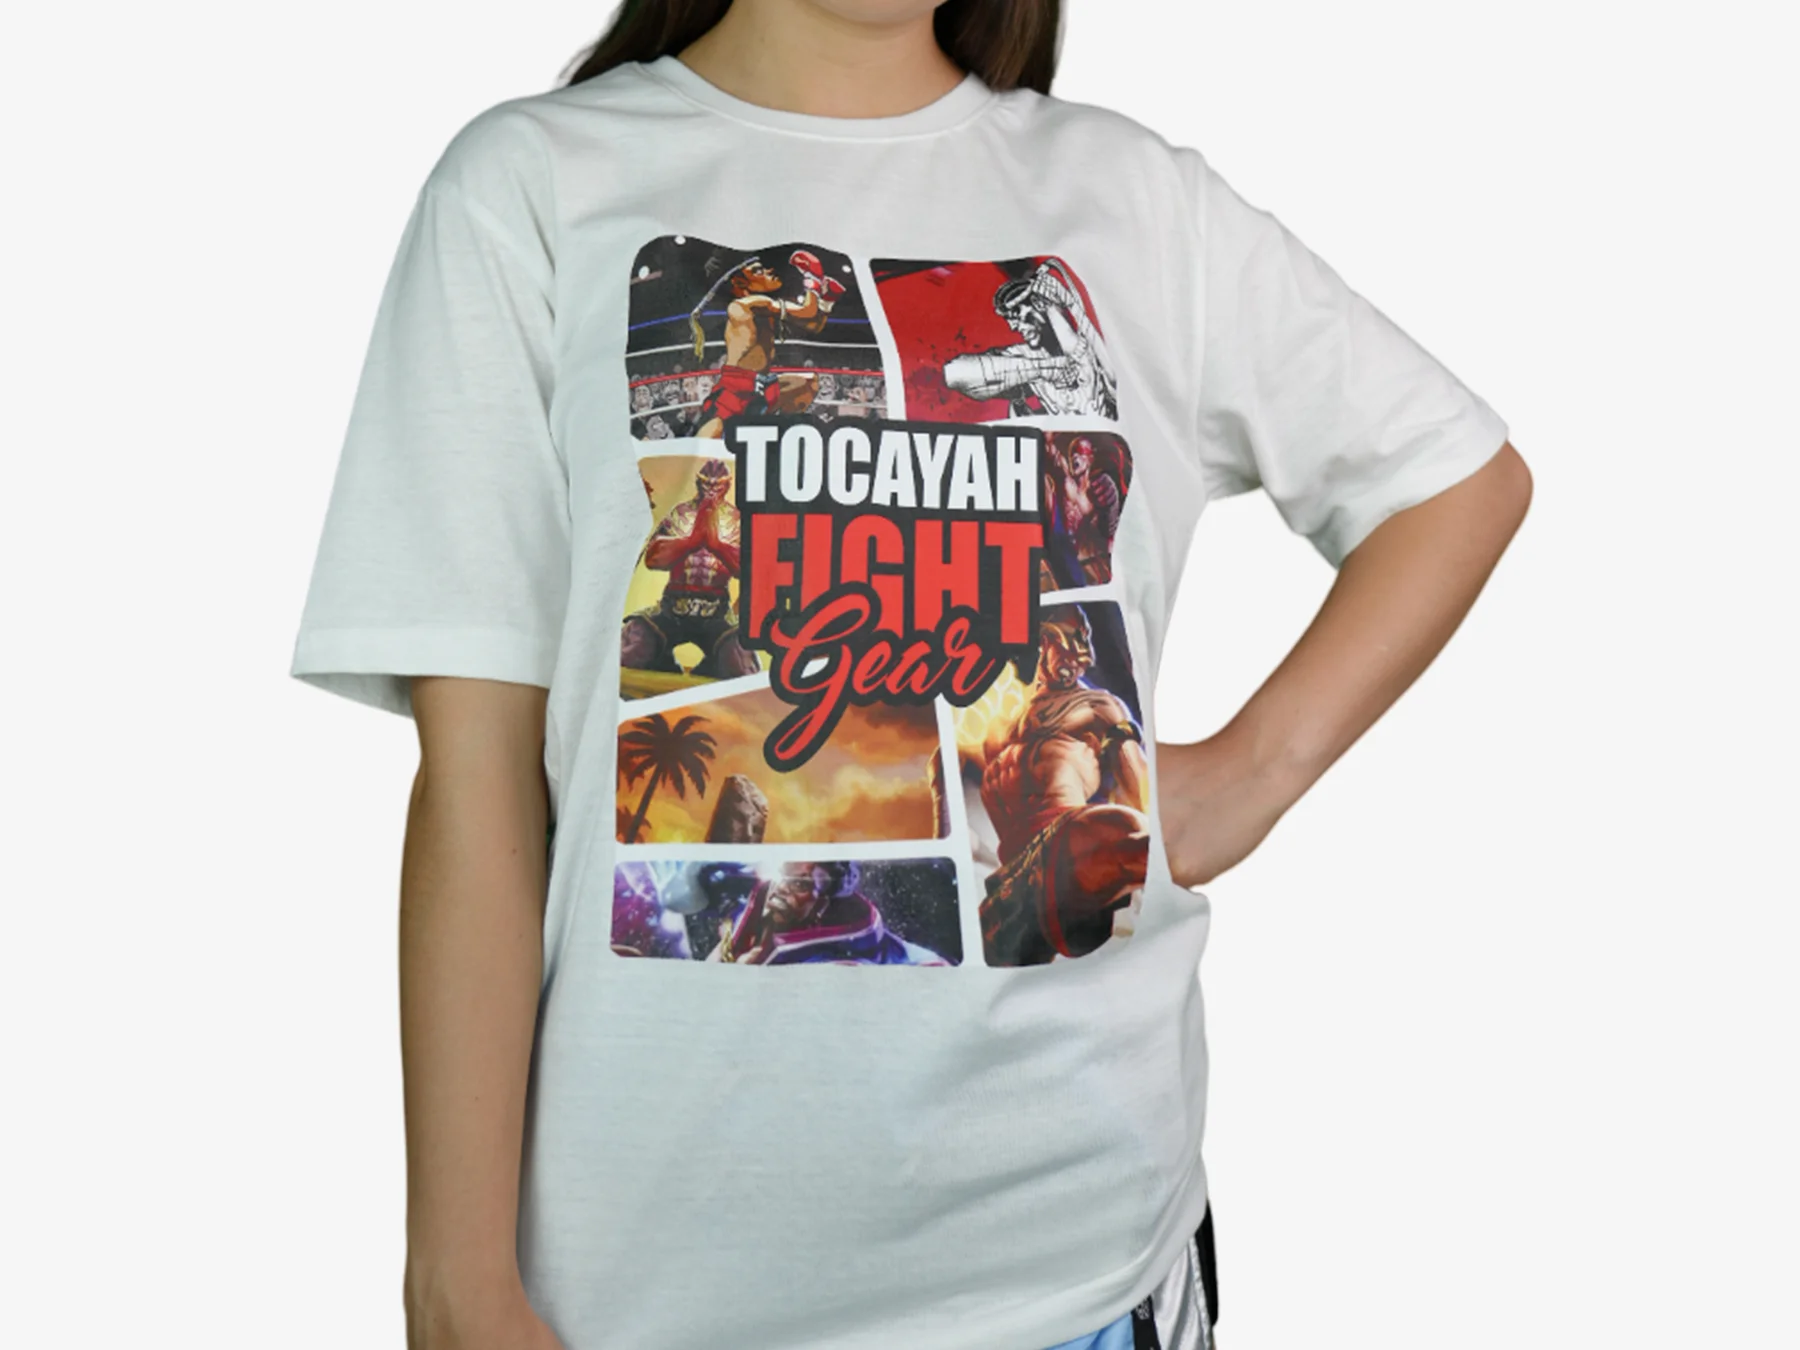 Tocayah vice fight tshirt 8